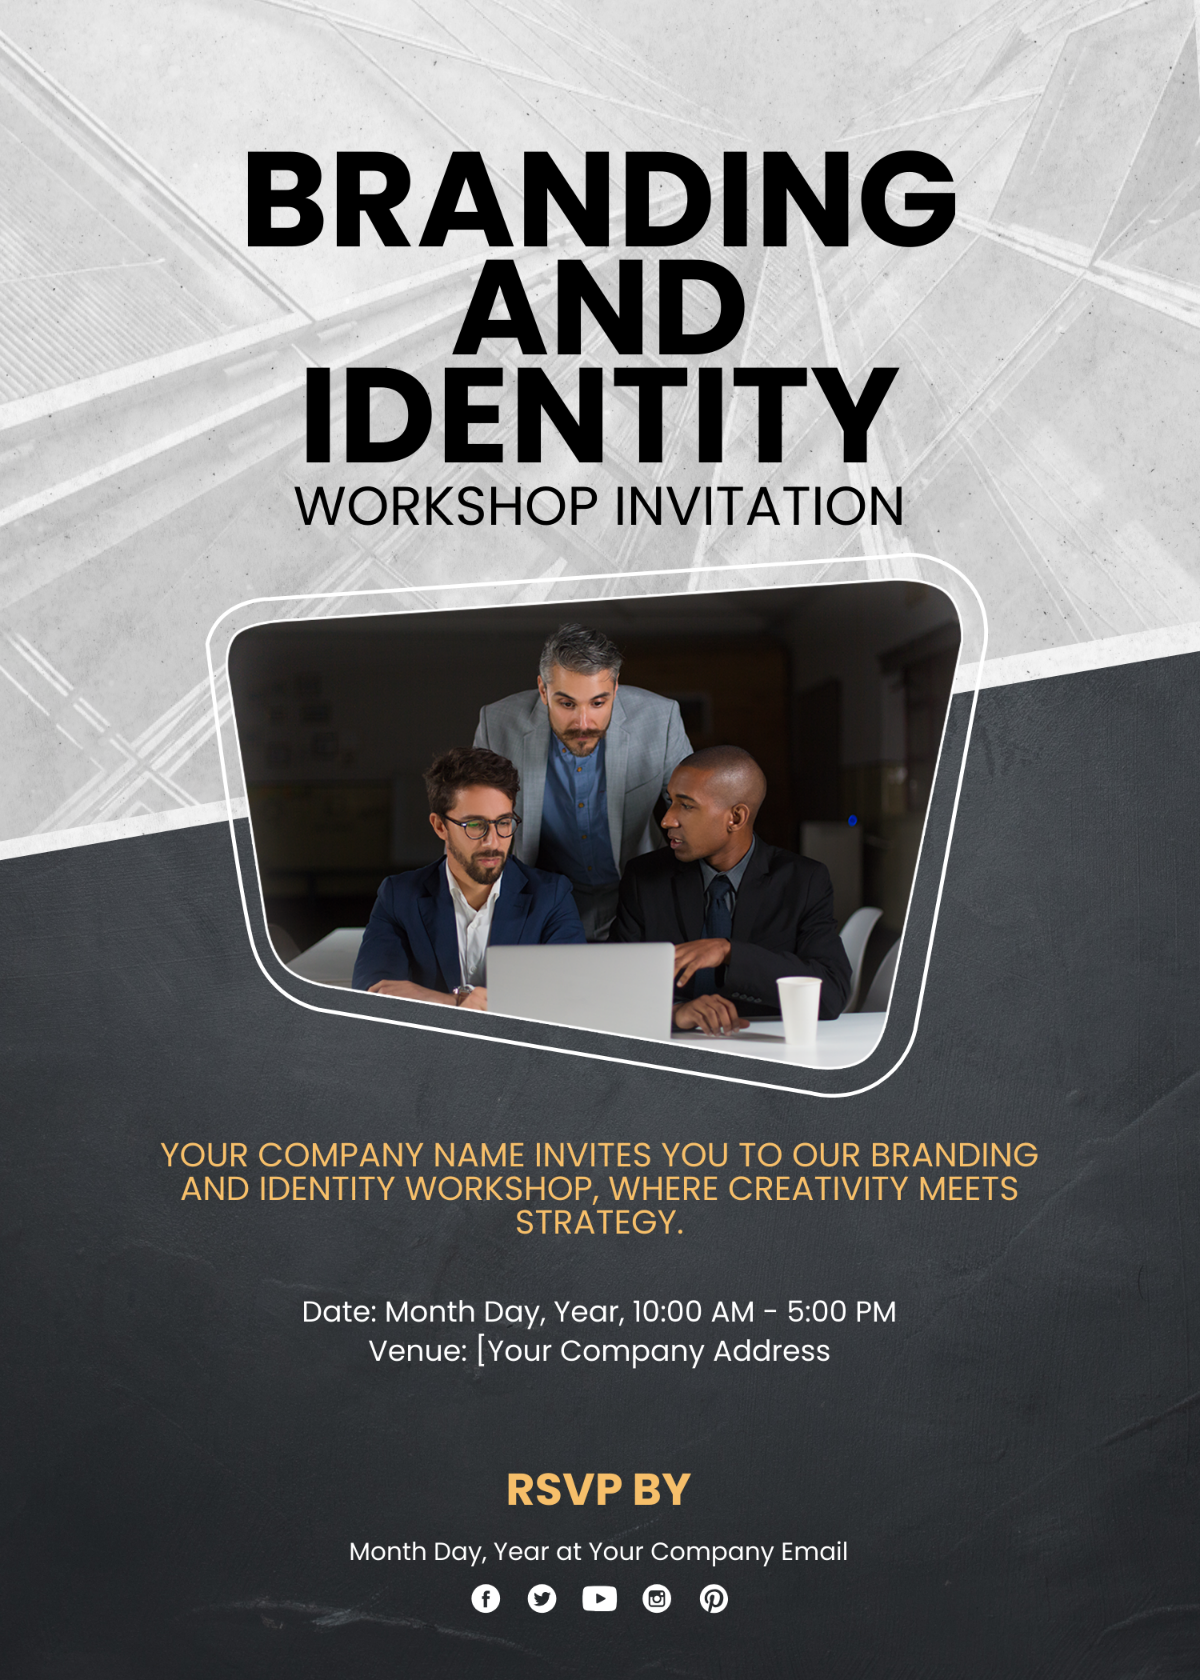 Branding and Identity Workshop Invitation Card Template